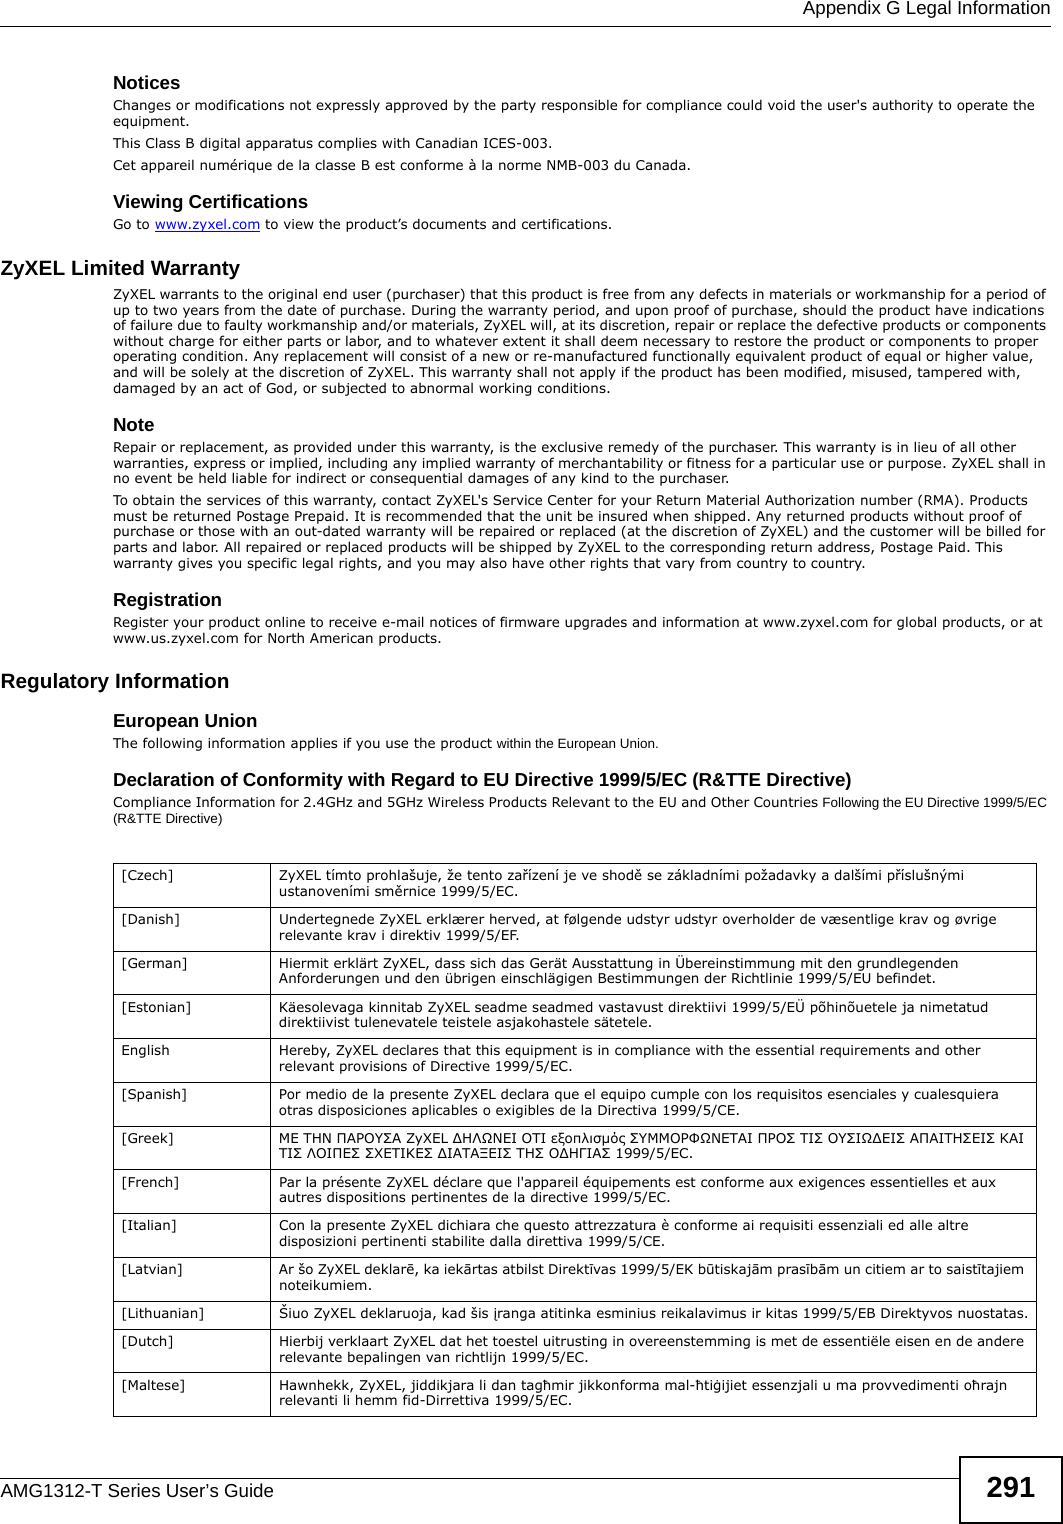  Appendix G Legal InformationAMG1312-T Series User’s Guide 291Notices Changes or modifications not expressly approved by the party responsible for compliance could void the user&apos;s authority to operate the equipment.This Class B digital apparatus complies with Canadian ICES-003.Cet appareil numérique de la classe B est conforme à la norme NMB-003 du Canada.Viewing CertificationsGo to www.zyxel.com to view the product’s documents and certifications.ZyXEL Limited WarrantyZyXEL warrants to the original end user (purchaser) that this product is free from any defects in materials or workmanship for a period of up to two years from the date of purchase. During the warranty period, and upon proof of purchase, should the product have indications of failure due to faulty workmanship and/or materials, ZyXEL will, at its discretion, repair or replace the defective products or components without charge for either parts or labor, and to whatever extent it shall deem necessary to restore the product or components to proper operating condition. Any replacement will consist of a new or re-manufactured functionally equivalent product of equal or higher value, and will be solely at the discretion of ZyXEL. This warranty shall not apply if the product has been modified, misused, tampered with, damaged by an act of God, or subjected to abnormal working conditions.NoteRepair or replacement, as provided under this warranty, is the exclusive remedy of the purchaser. This warranty is in lieu of all other warranties, express or implied, including any implied warranty of merchantability or fitness for a particular use or purpose. ZyXEL shall in no event be held liable for indirect or consequential damages of any kind to the purchaser.To obtain the services of this warranty, contact ZyXEL&apos;s Service Center for your Return Material Authorization number (RMA). Products must be returned Postage Prepaid. It is recommended that the unit be insured when shipped. Any returned products without proof of purchase or those with an out-dated warranty will be repaired or replaced (at the discretion of ZyXEL) and the customer will be billed for parts and labor. All repaired or replaced products will be shipped by ZyXEL to the corresponding return address, Postage Paid. This warranty gives you specific legal rights, and you may also have other rights that vary from country to country.RegistrationRegister your product online to receive e-mail notices of firmware upgrades and information at www.zyxel.com for global products, or at www.us.zyxel.com for North American products.Regulatory InformationEuropean UnionThe following information applies if you use the product within the European Union.Declaration of Conformity with Regard to EU Directive 1999/5/EC (R&amp;TTE Directive)Compliance Information for 2.4GHz and 5GHz Wireless Products Relevant to the EU and Other Countries Following the EU Directive 1999/5/EC (R&amp;TTE Directive) [Czech] ZyXEL tímto prohlašuje, že tento zařízení je ve shodě se základními požadavky a dalšími příslušnými ustanoveními směrnice 1999/5/EC.[Danish] Undertegnede ZyXEL erklærer herved, at følgende udstyr udstyr overholder de væsentlige krav og øvrige relevante krav i direktiv 1999/5/EF.[German] Hiermit erklärt ZyXEL, dass sich das Gerät Ausstattung in Übereinstimmung mit den grundlegenden Anforderungen und den übrigen einschlägigen Bestimmungen der Richtlinie 1999/5/EU befindet.[Estonian] Käesolevaga kinnitab ZyXEL seadme seadmed vastavust direktiivi 1999/5/EÜ põhinõuetele ja nimetatud direktiivist tulenevatele teistele asjakohastele sätetele.English Hereby, ZyXEL declares that this equipment is in compliance with the essential requirements and other relevant provisions of Directive 1999/5/EC.[Spanish] Por medio de la presente ZyXEL declara que el equipo cumple con los requisitos esenciales y cualesquiera otras disposiciones aplicables o exigibles de la Directiva 1999/5/CE.[Greek] ΜΕ ΤΗΝ ΠΑΡΟΥΣΑ ZyXEL ∆ΗΛΩΝΕΙ ΟΤΙ εξοπλισμός ΣΥΜΜΟΡΦΩΝΕΤΑΙ ΠΡΟΣ ΤΙΣ ΟΥΣΙΩ∆ΕΙΣ ΑΠΑΙΤΗΣΕΙΣ ΚΑΙ ΤΙΣ ΛΟΙΠΕΣ ΣΧΕΤΙΚΕΣ ∆ΙΑΤΑΞΕΙΣ ΤΗΣ Ο∆ΗΓΙΑΣ 1999/5/ΕC.[French] Par la présente ZyXEL déclare que l&apos;appareil équipements est conforme aux exigences essentielles et aux autres dispositions pertinentes de la directive 1999/5/EC.[Italian] Con la presente ZyXEL dichiara che questo attrezzatura è conforme ai requisiti essenziali ed alle altre disposizioni pertinenti stabilite dalla direttiva 1999/5/CE.[Latvian] Ar šo ZyXEL deklarē, ka iekārtas atbilst Direktīvas 1999/5/EK būtiskajām prasībām un citiem ar to saistītajiem noteikumiem.[Lithuanian]  Šiuo ZyXEL deklaruoja, kad šis įranga atitinka esminius reikalavimus ir kitas 1999/5/EB Direktyvos nuostatas.[Dutch] Hierbij verklaart ZyXEL dat het toestel uitrusting in overeenstemming is met de essentiële eisen en de andere relevante bepalingen van richtlijn 1999/5/EC.[Maltese] Hawnhekk, ZyXEL, jiddikjara li dan tagħmir jikkonforma mal-ħtiġijiet essenzjali u ma provvedimenti oħrajn relevanti li hemm fid-Dirrettiva 1999/5/EC.